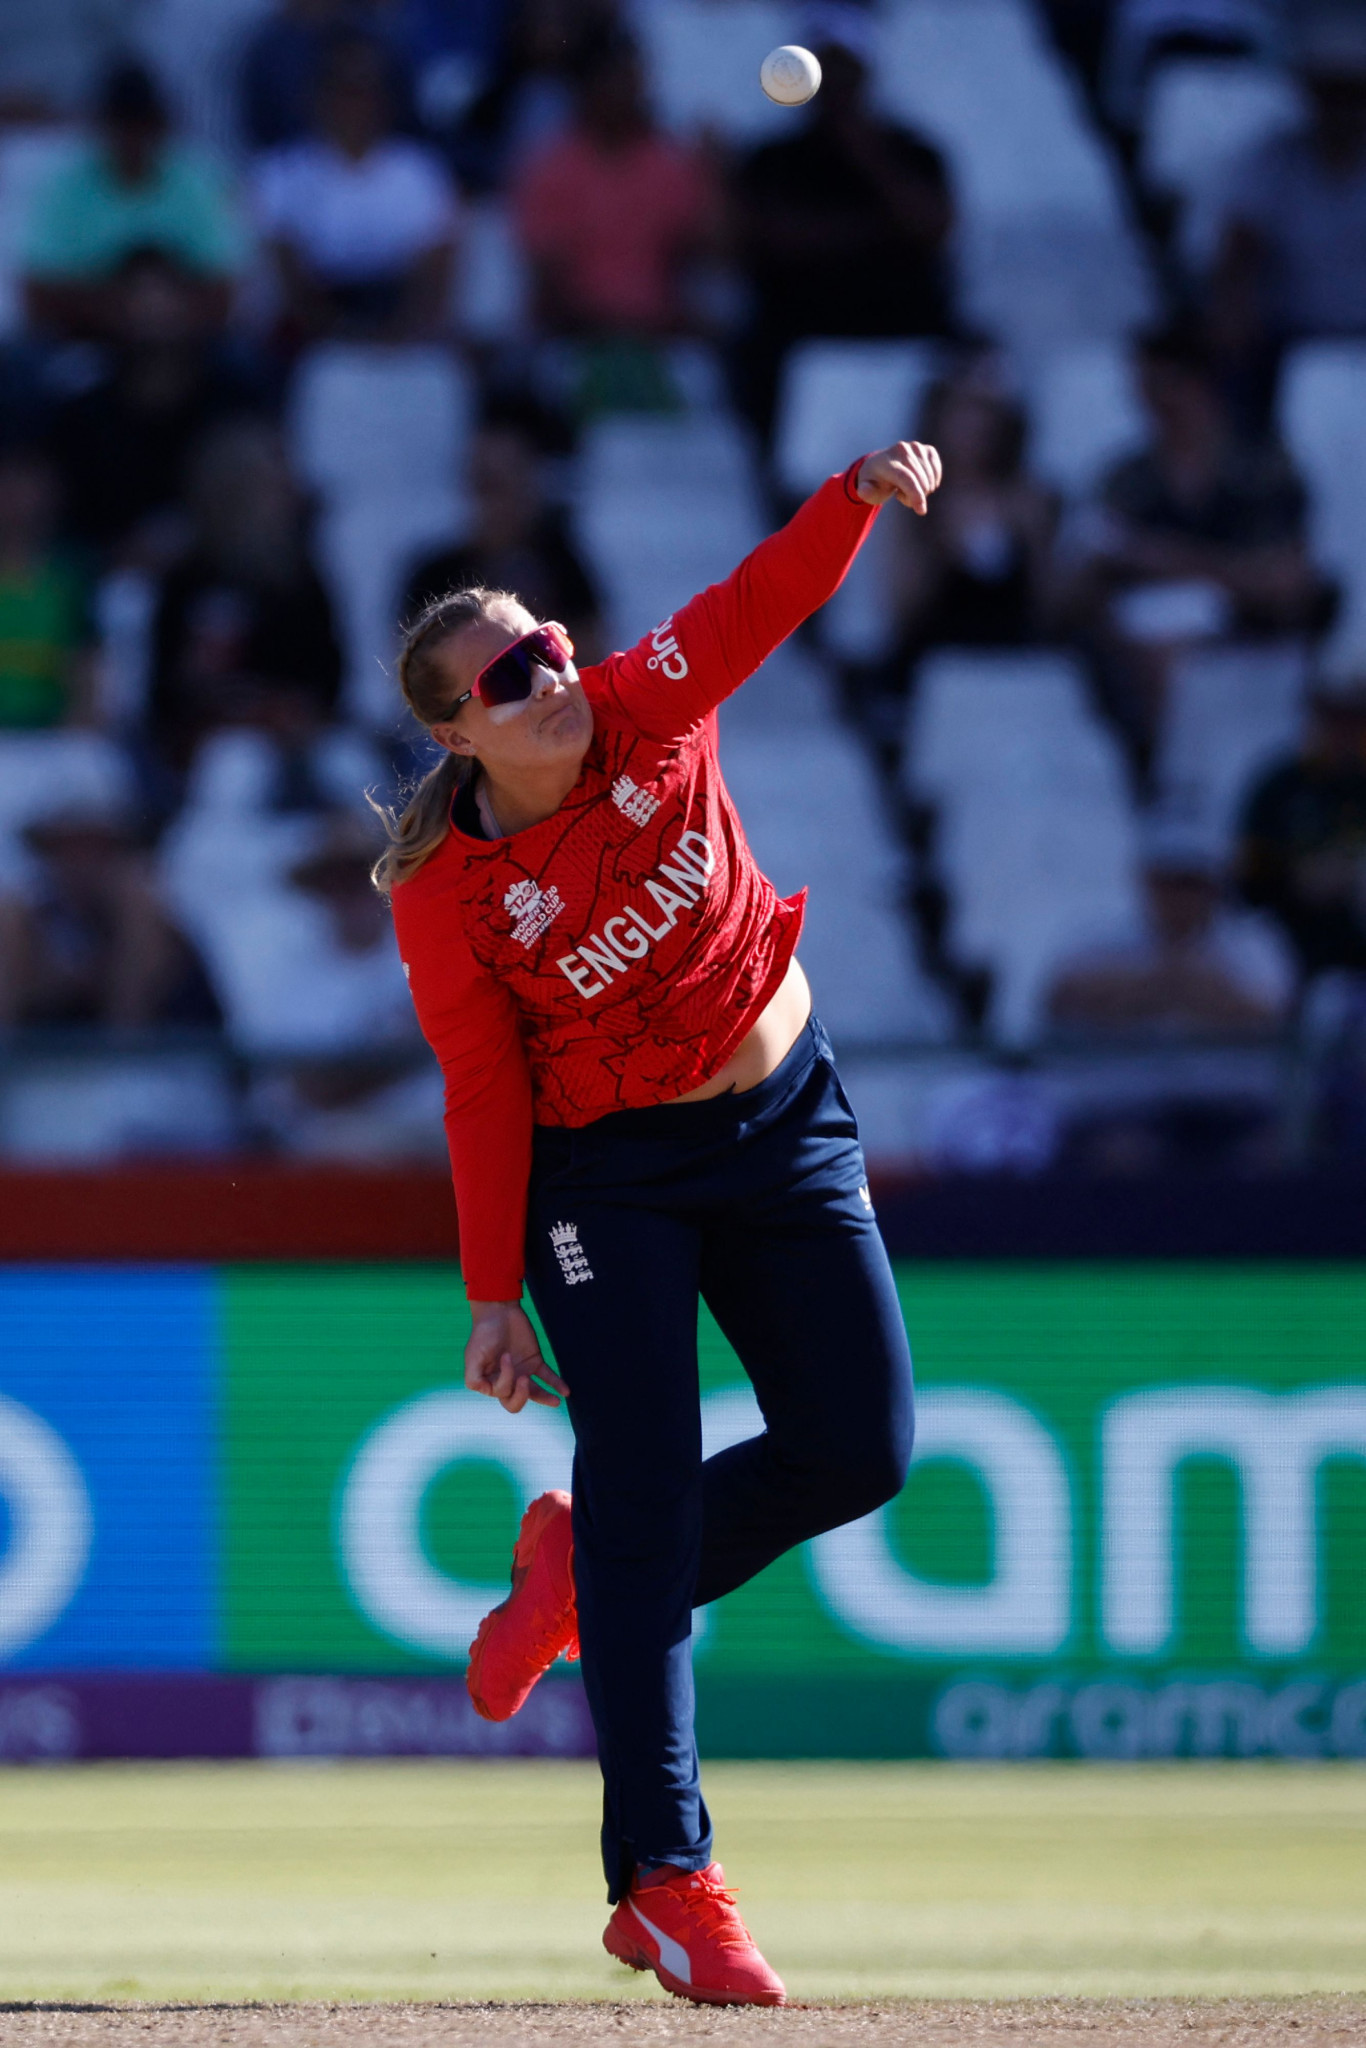 Sophie Ecclestone took the final wicket as England defeated Pakistan by a record margin at a Women's T20 World Cup ©Getty Images